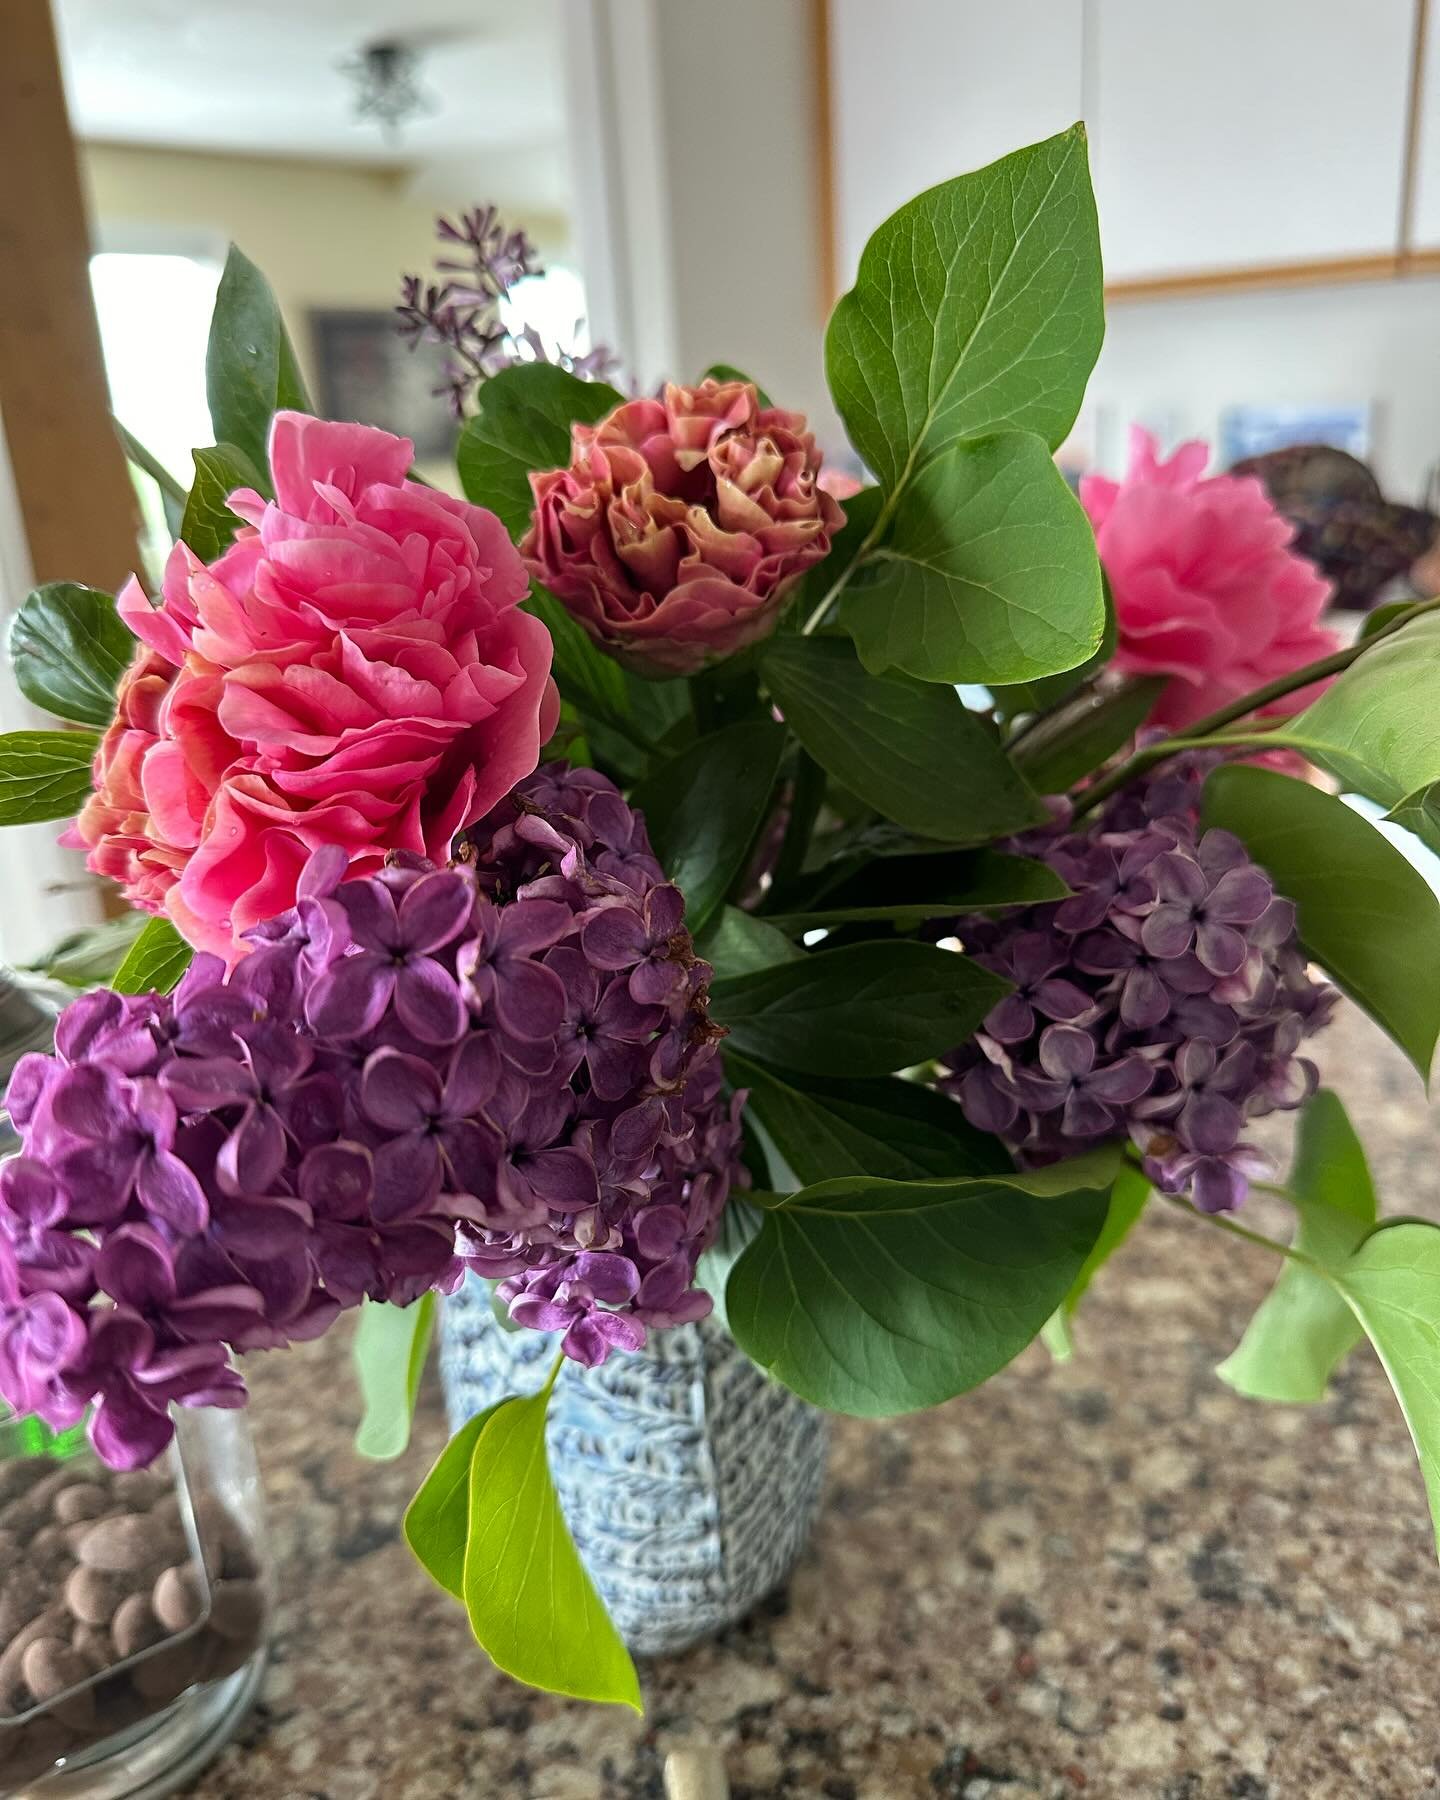 Happy May Day! 🌸🌺🌸 The peonies and lilacs are nonstop!! I wish you could smell my kitchen right now!
::
::
#aprilshowersbringmayflowers #mayday #happymayday #peonies #lilacs #cottagegardens #bloomoftheday